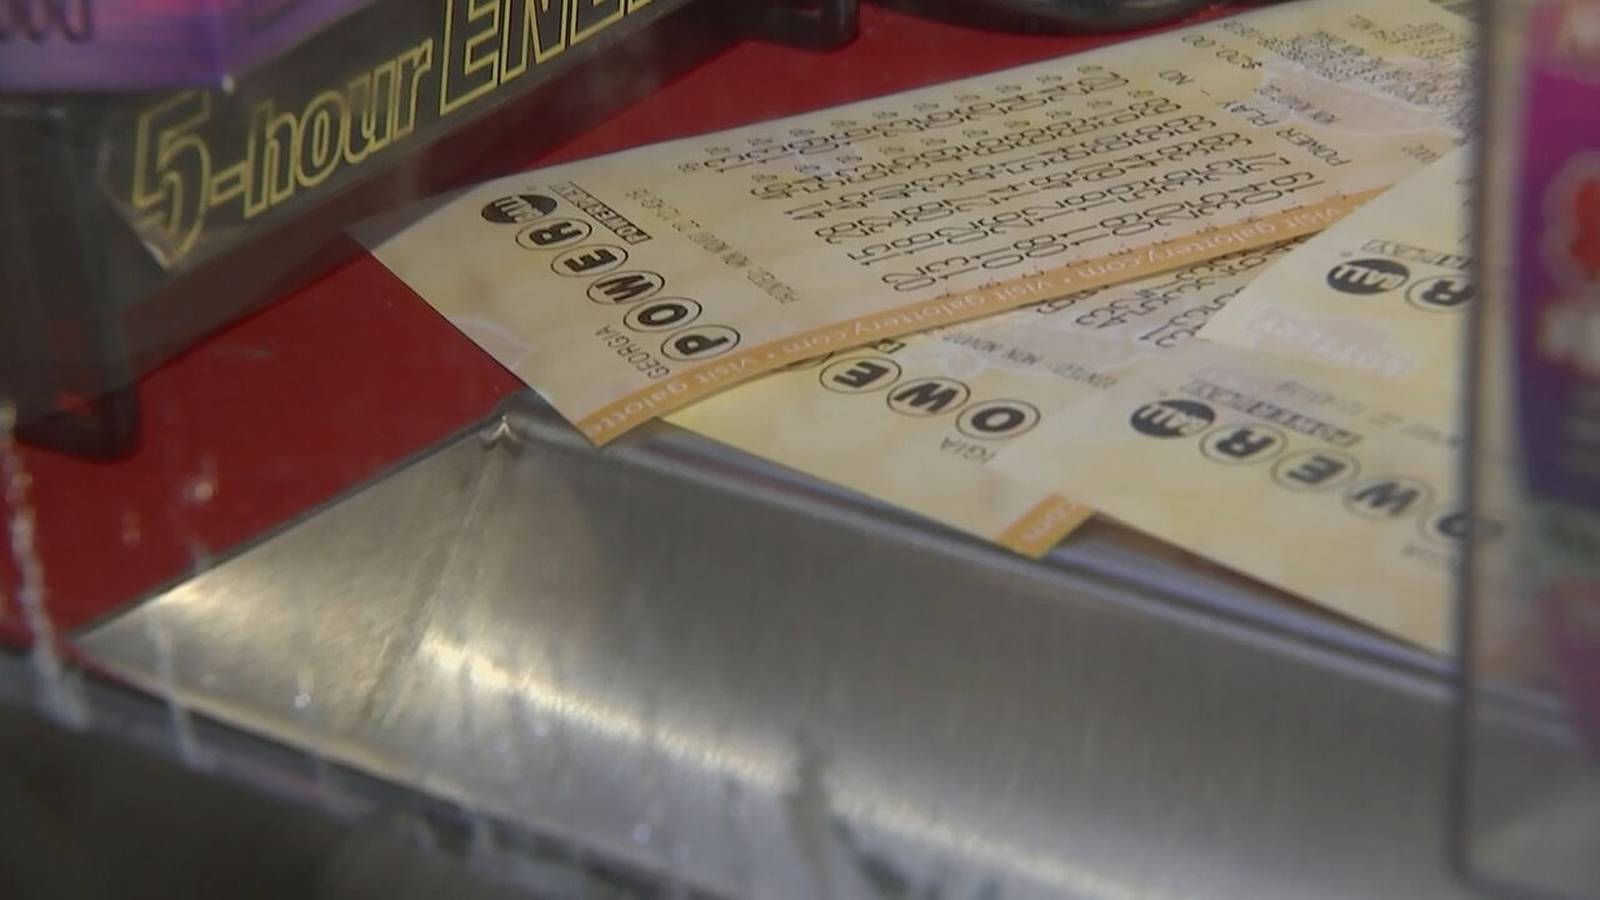 Winning tickets worth 1 million, 100K sold in for Powerball